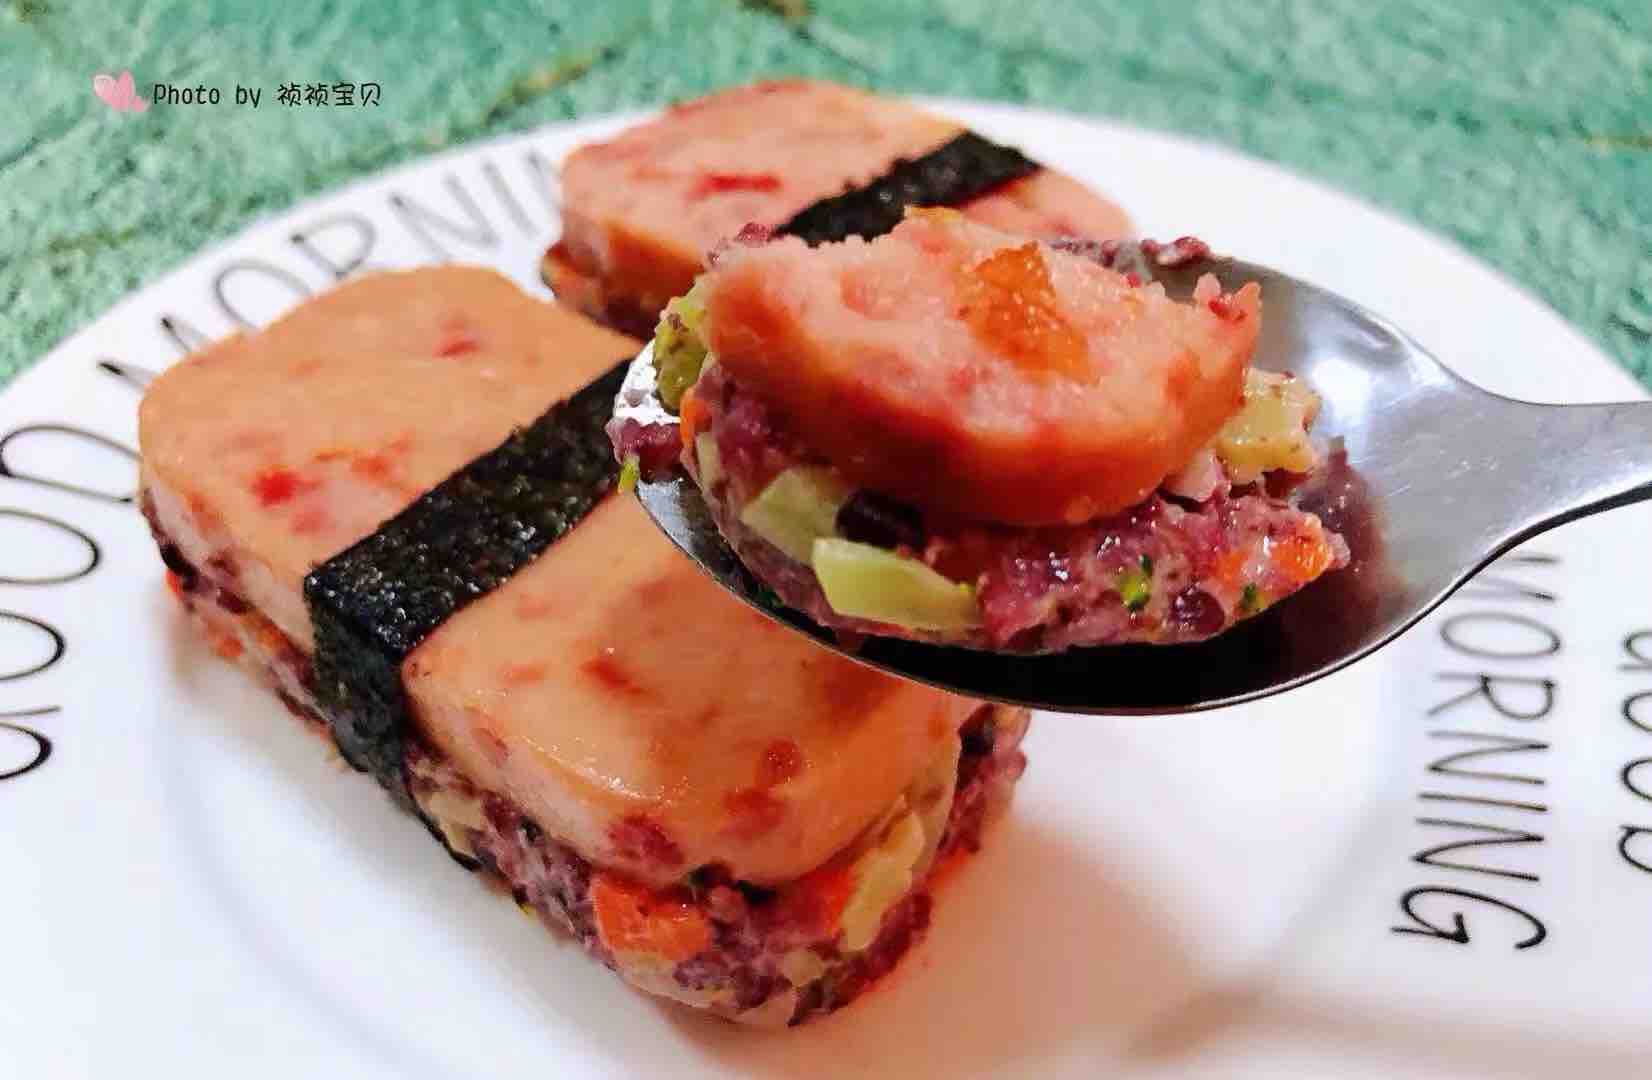 Luncheon Meat with Seasonal Vegetables Shuangmibao recipe